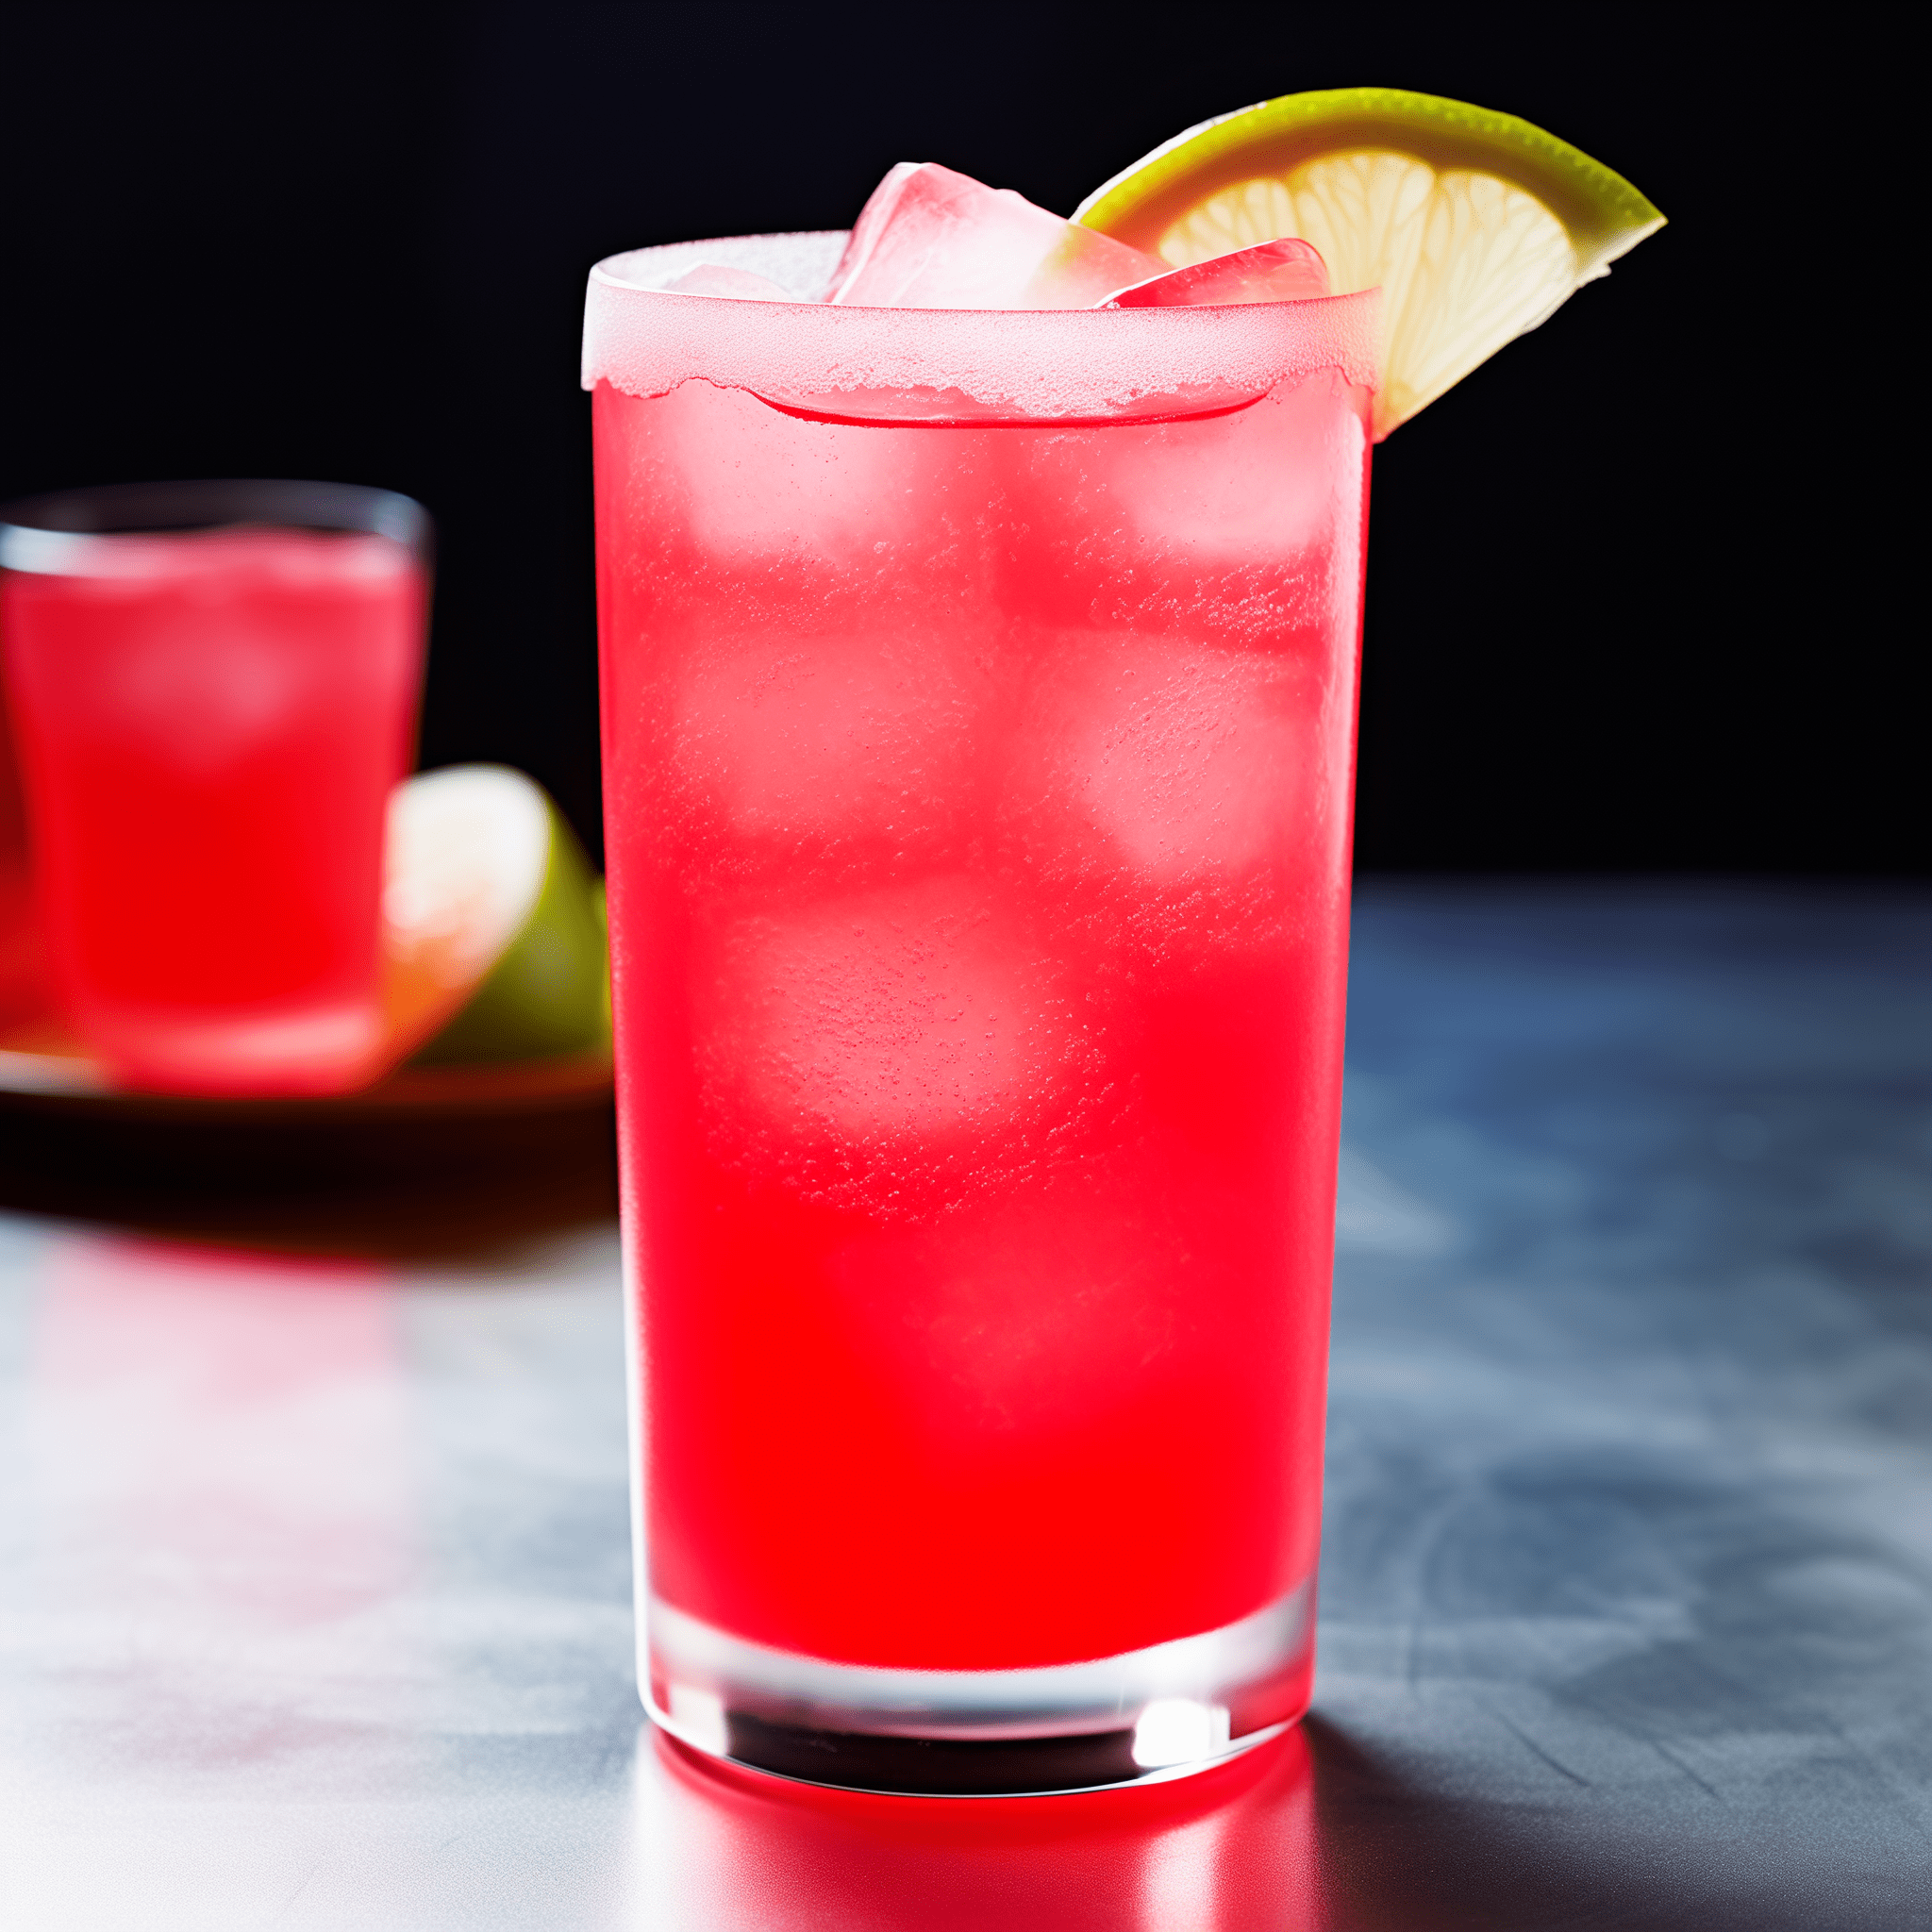 Watermelon Jolly Rancher Cocktail Recipe - The Watermelon Jolly Rancher cocktail is a delightful mix of sweet and sour with a fruity watermelon punch. It's a light and refreshing drink with a playful kick from the vodka.